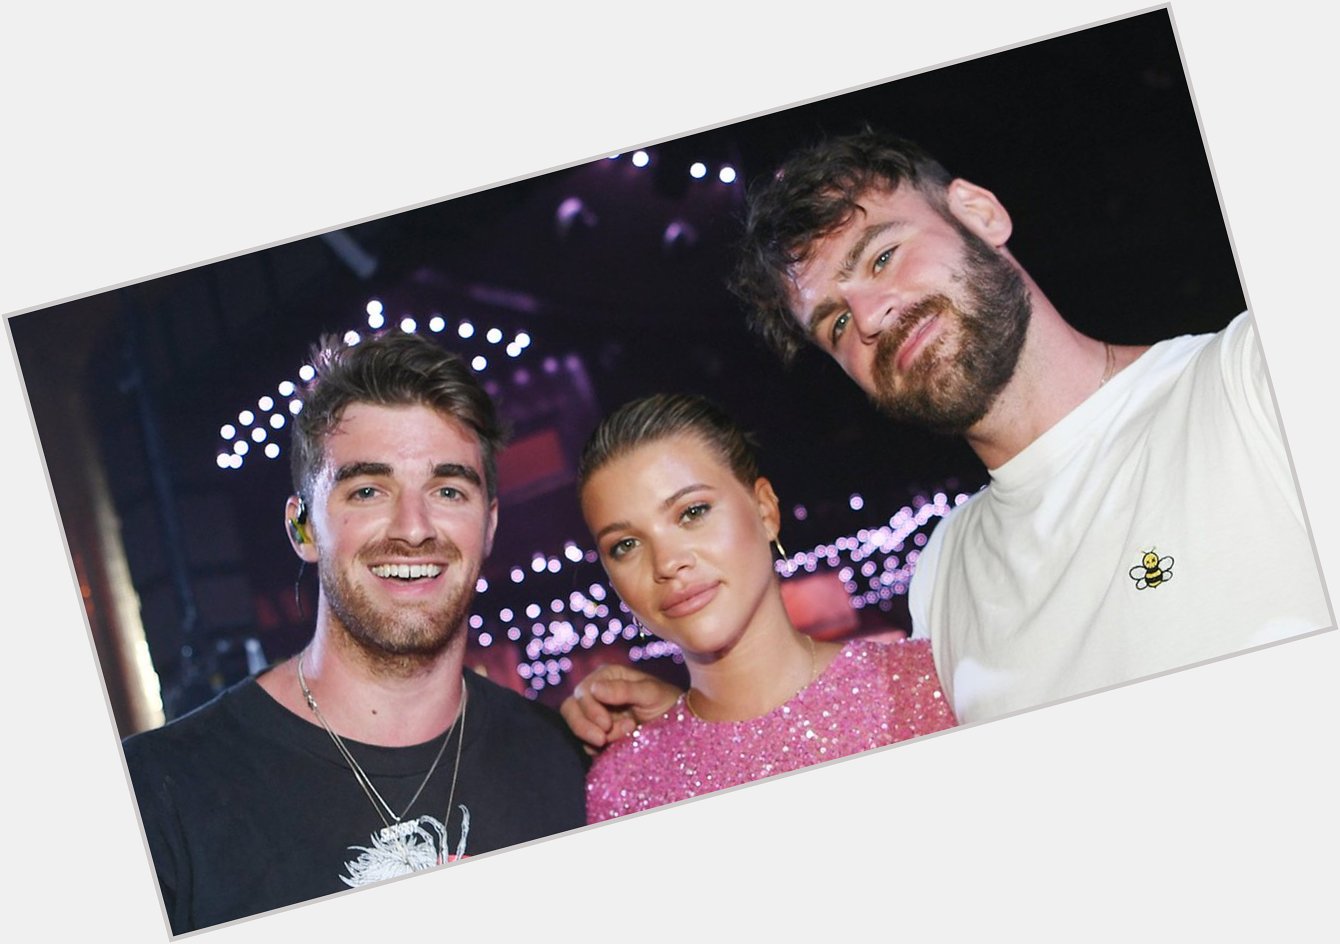 The Chainsmokers Get Whole Club To Sing \Happy Birthday\ To Sofia Richie -  